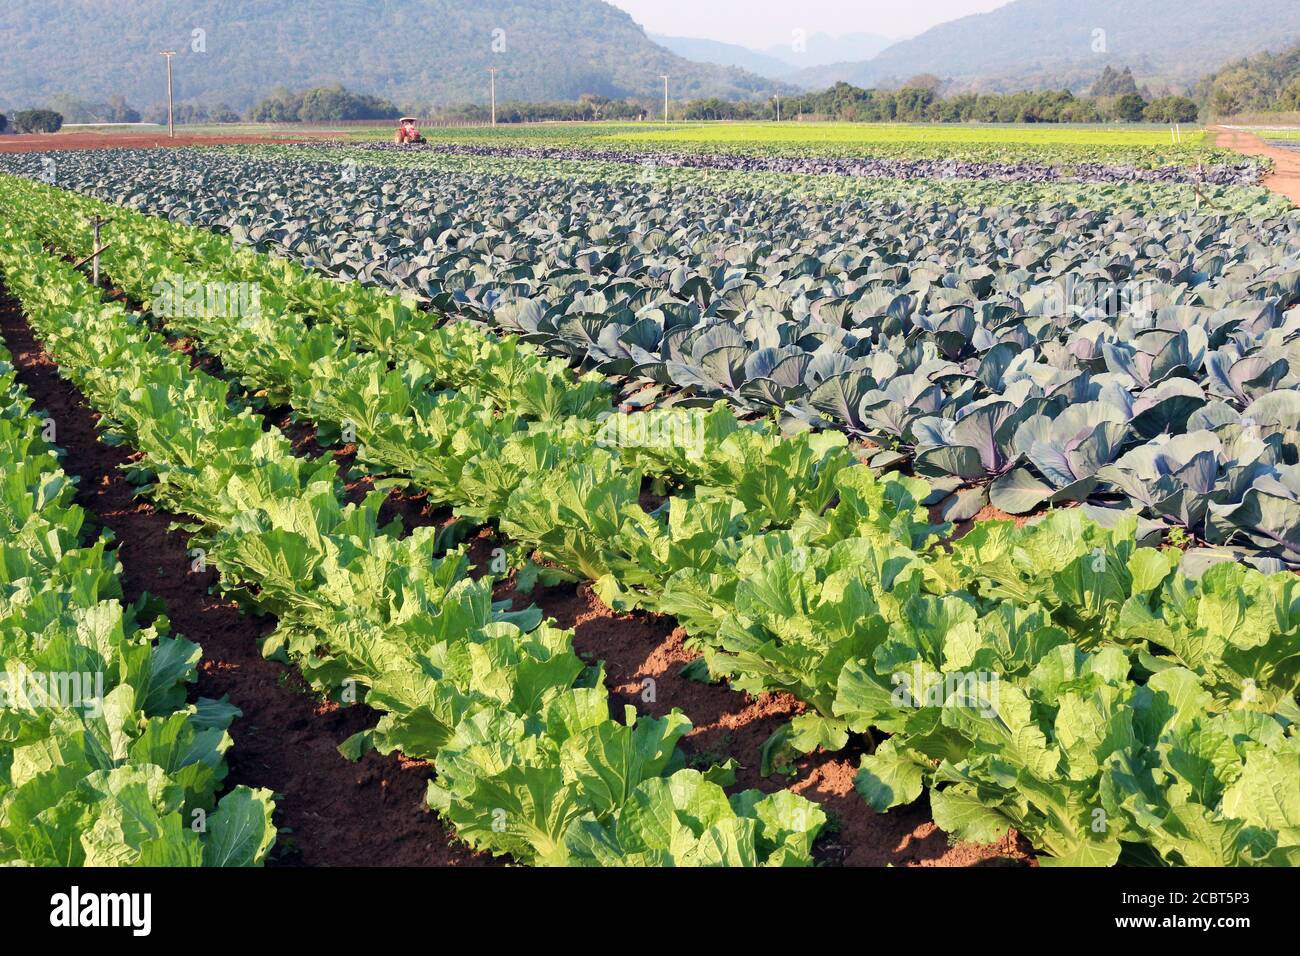 Agribusiness. Plantations of vegetables and food for the world. Stock Photo